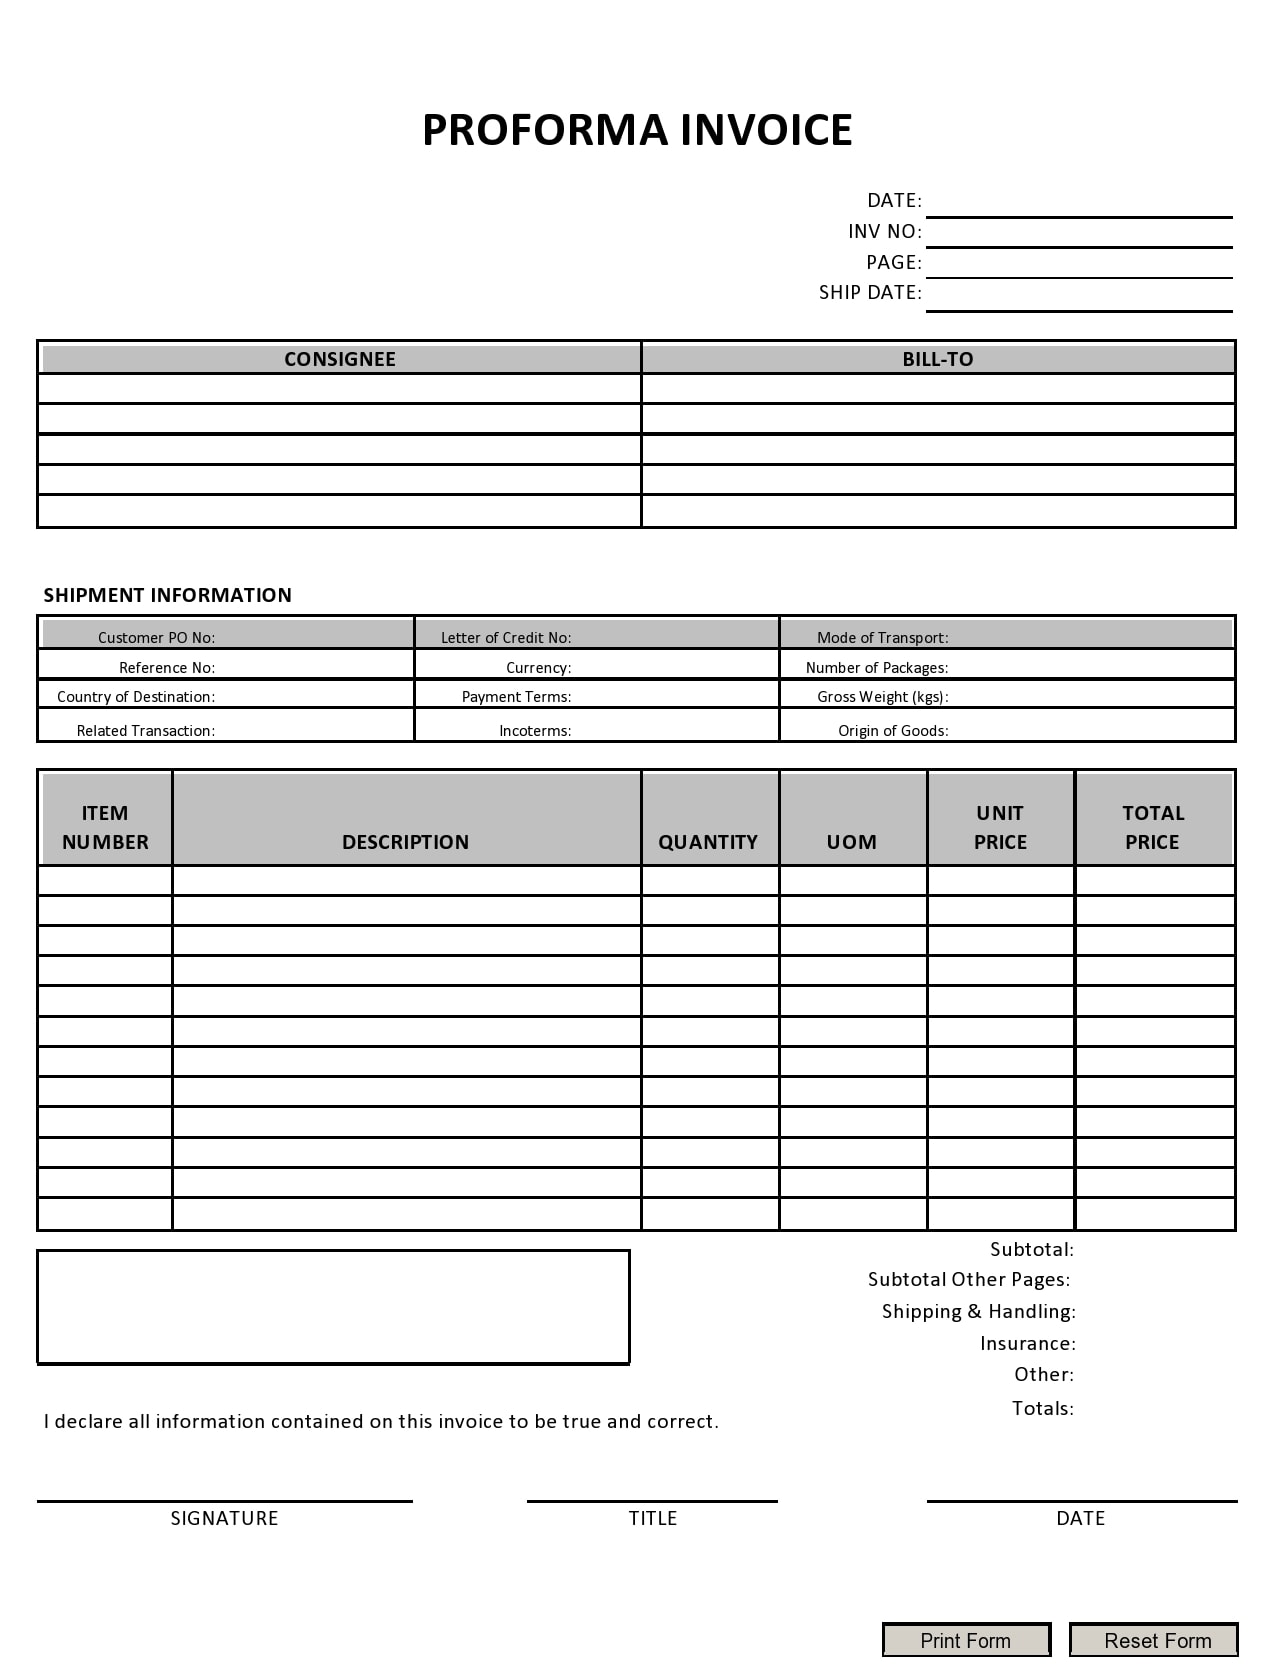 30-free-proforma-invoice-templates-excel-word-pdf-templatearchive